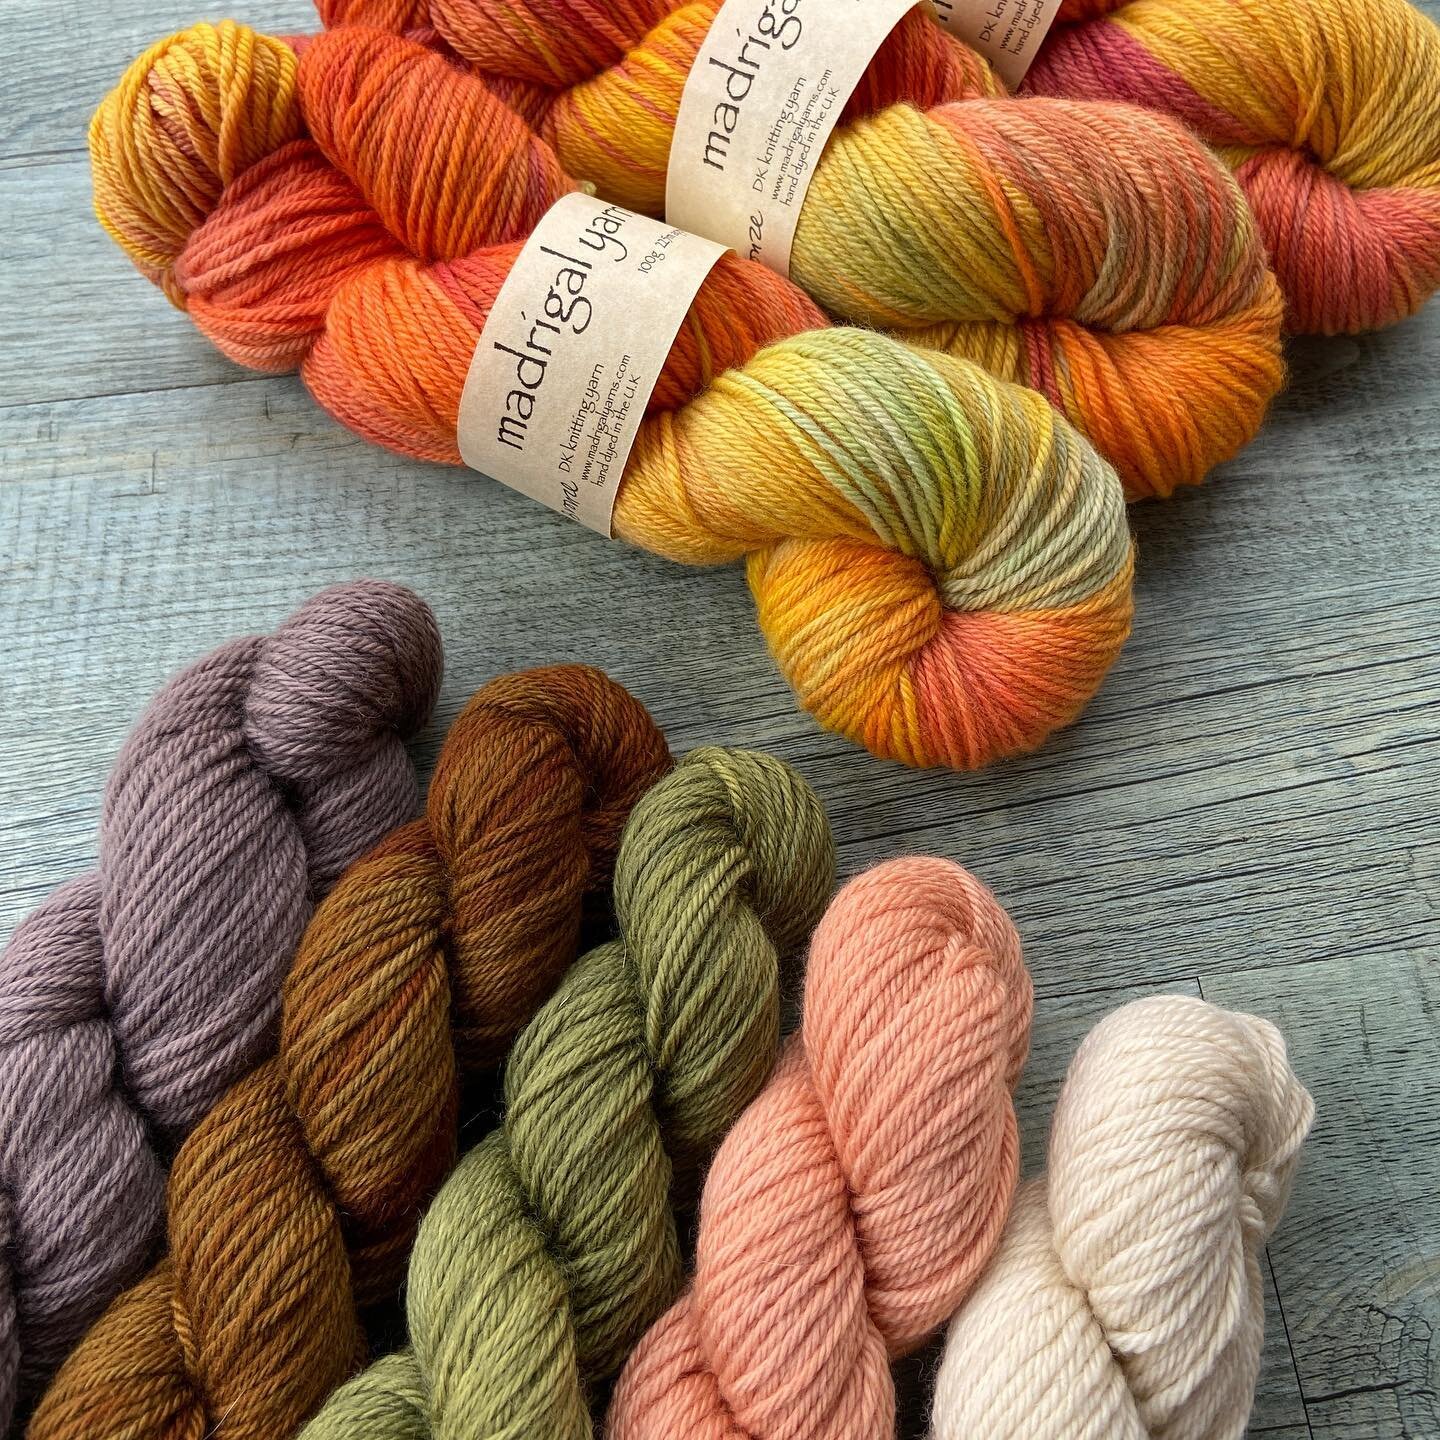 My final colour match for my heavenly Autumn Bronze involves (L-R) Cedar, Apollo, Willow, Peach, Linen. All shades available in store in beautiful mulesing free merino wool. Over 50 madrigal colourways in 100g skeins plus 30 solid solo colours in 50g